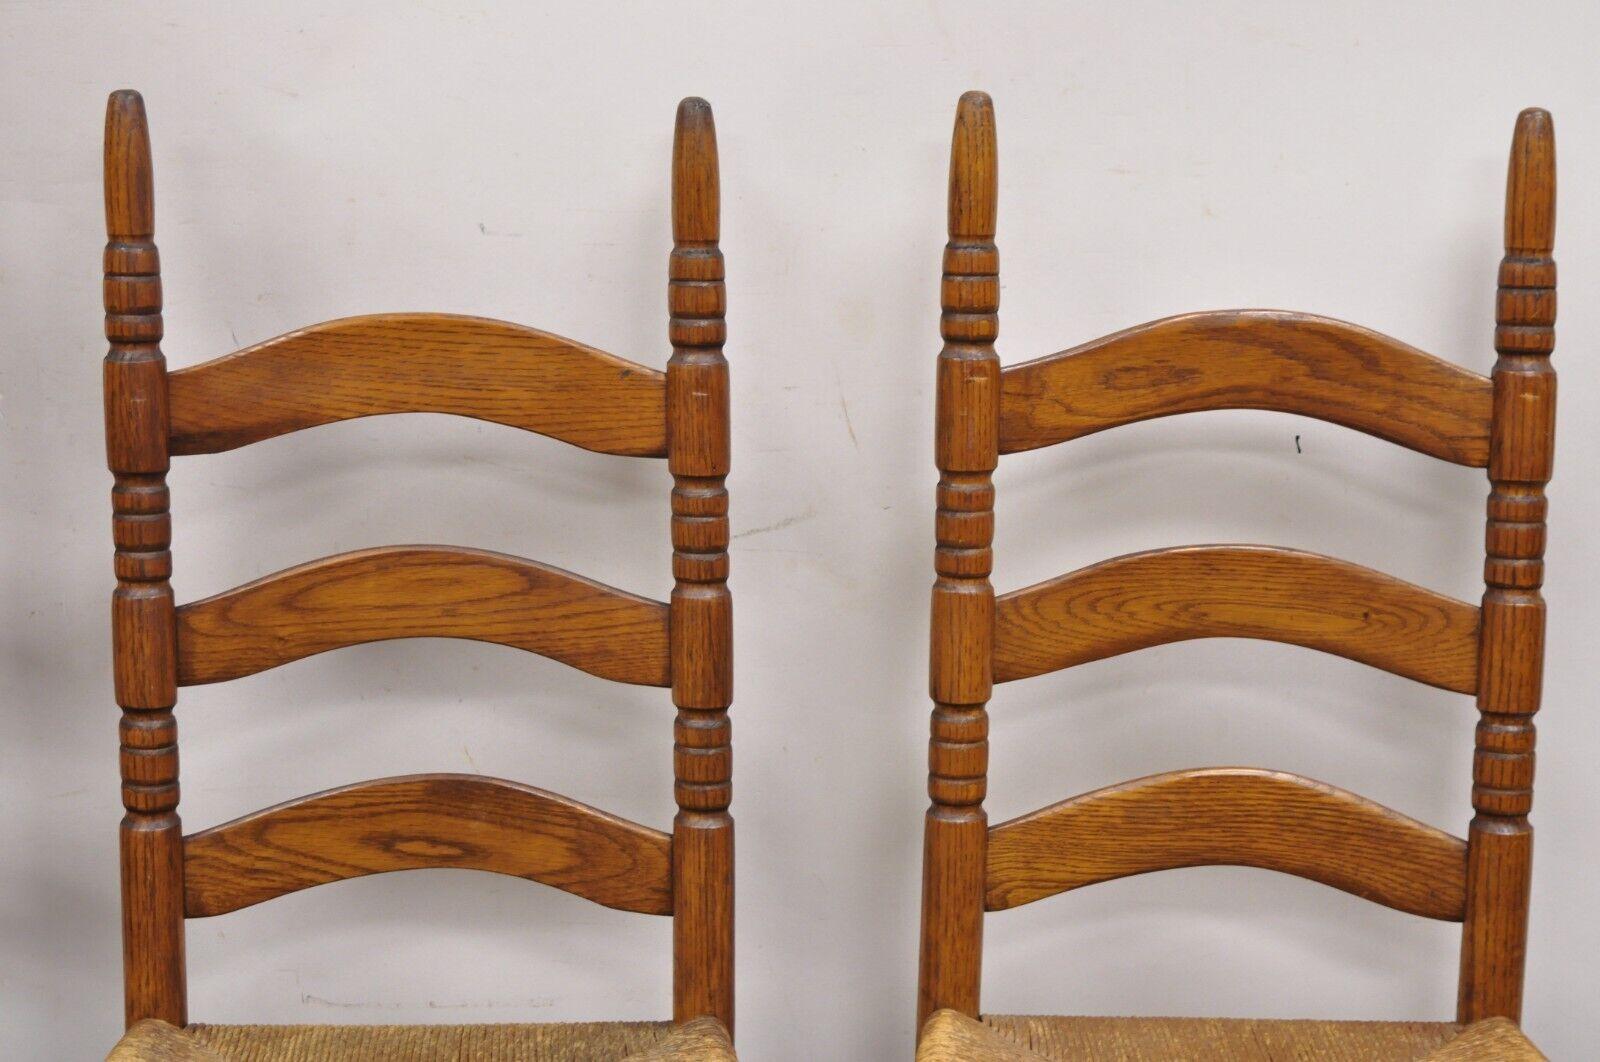 Antique Ladderback Primitive Rustic Oak Wood Rush Seat Dining Chairs - Set of 4 In Good Condition For Sale In Philadelphia, PA